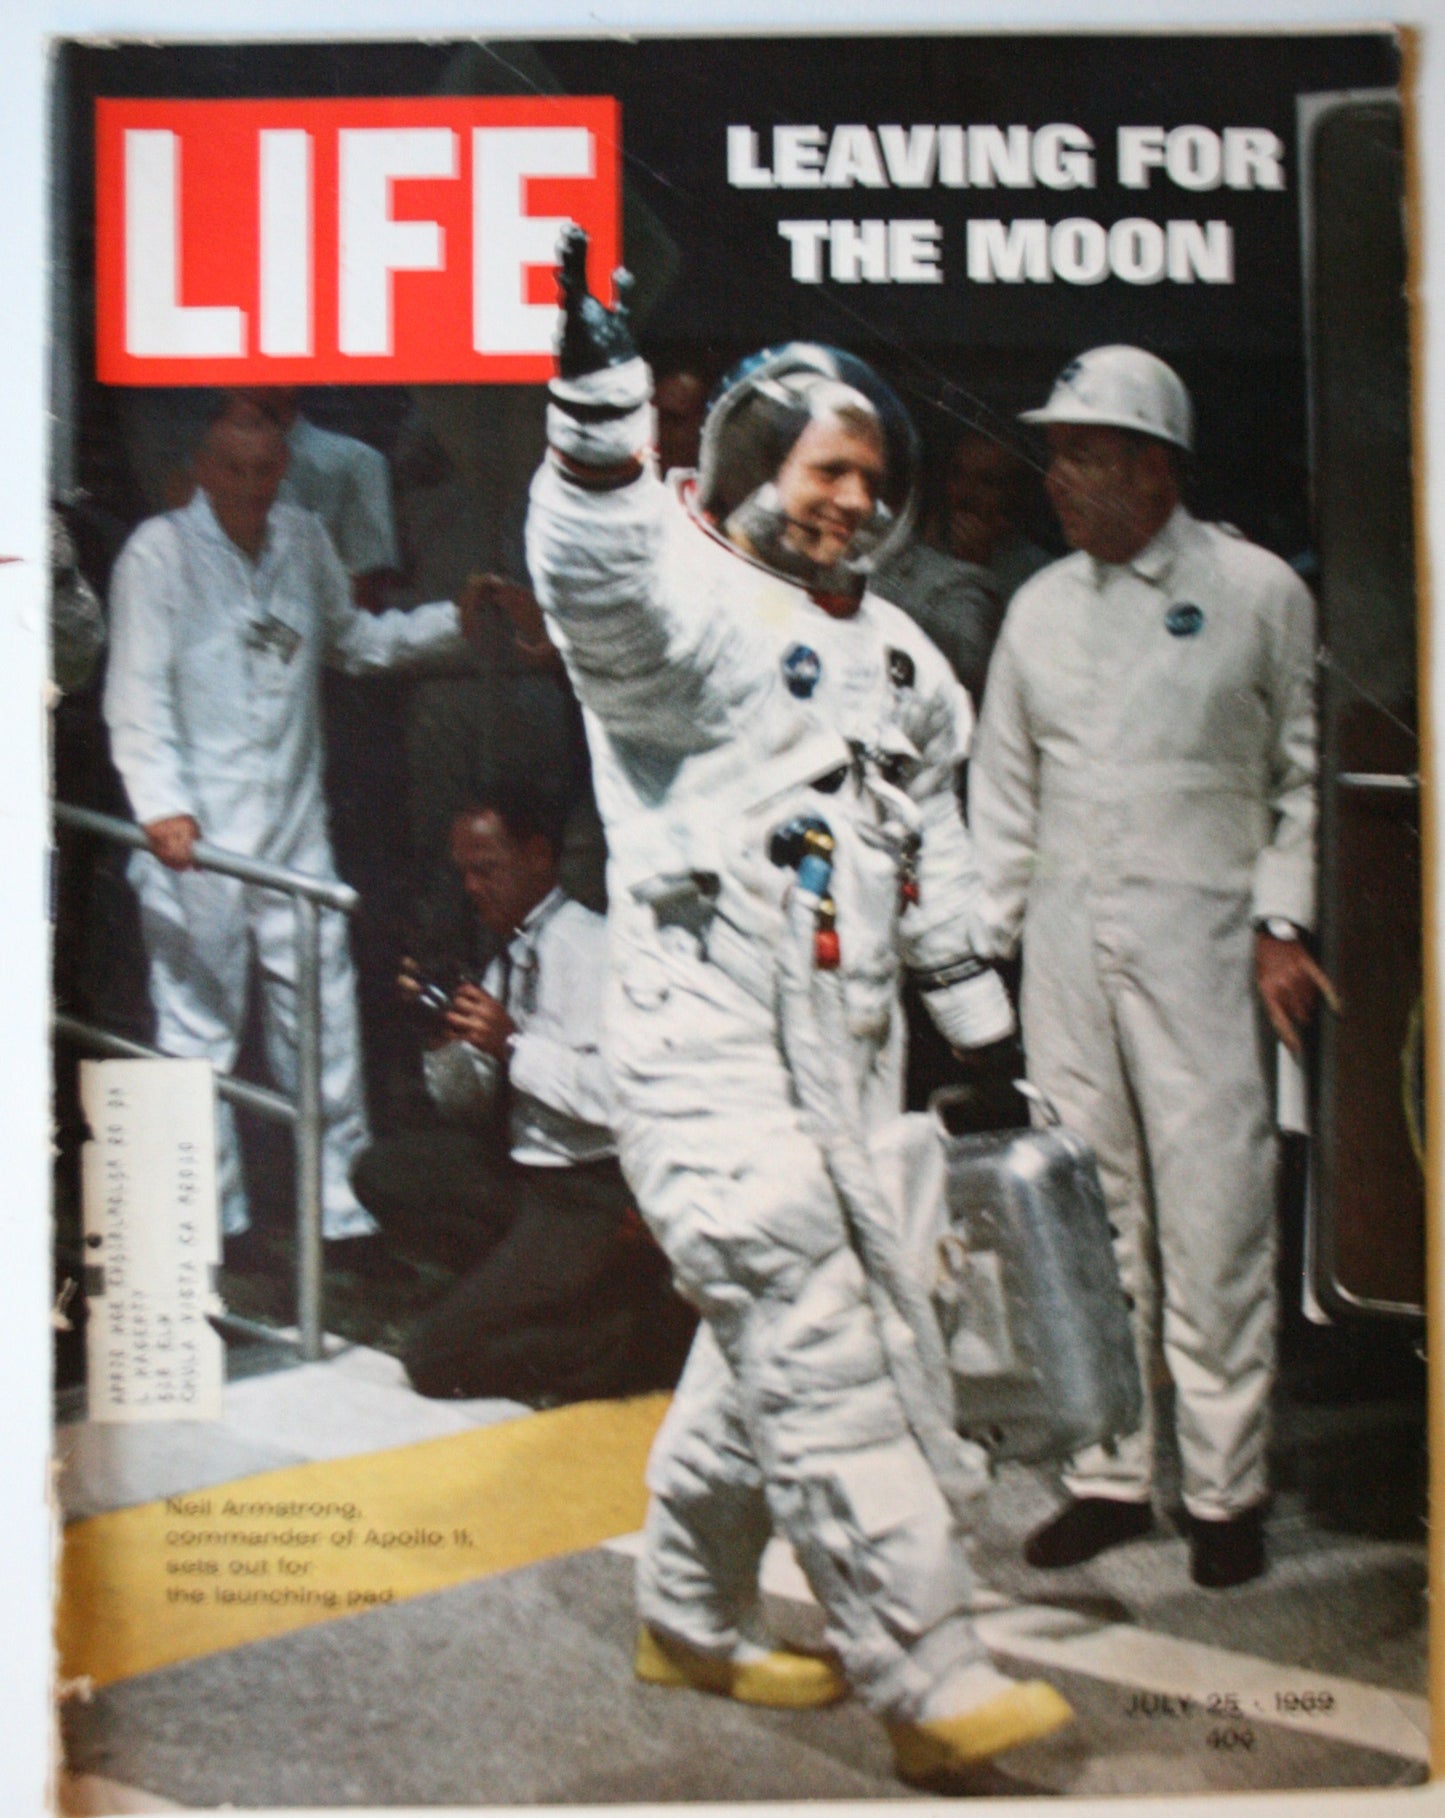 07 25 1969 Life Leaving For The Moon